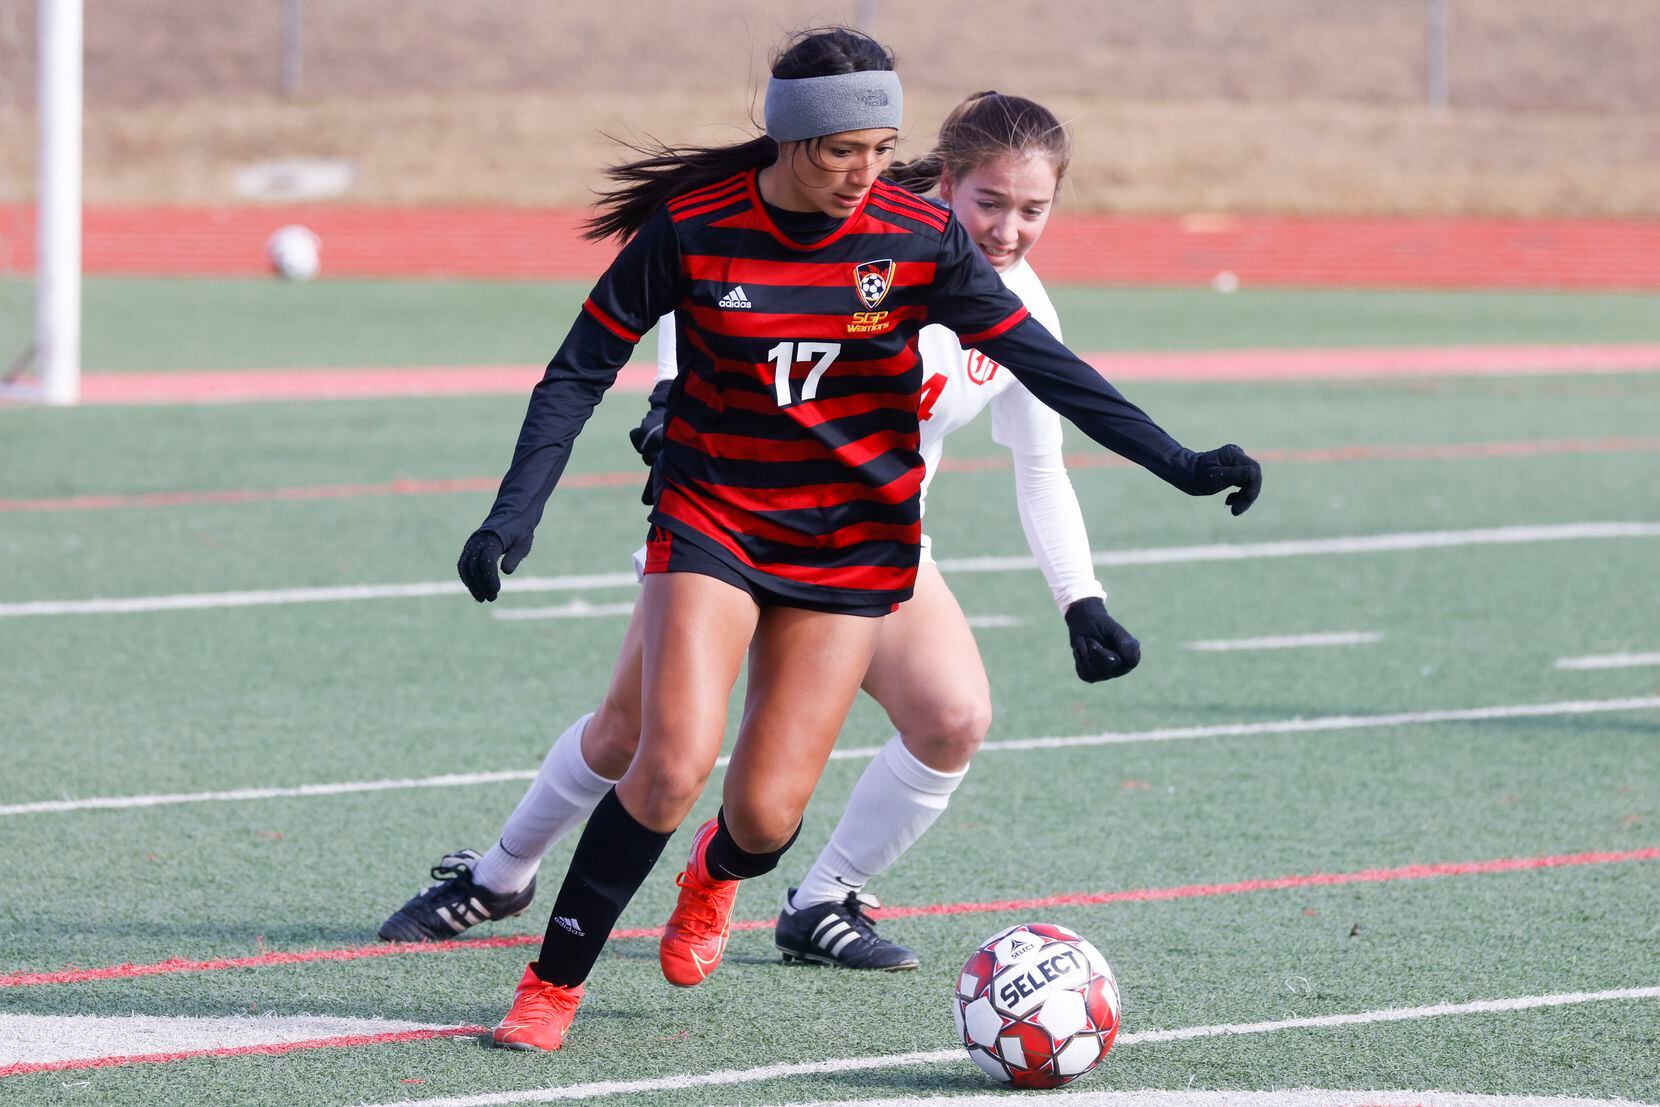 South Grand Prairie High School and Grapevine High School compete in a soccer game at...